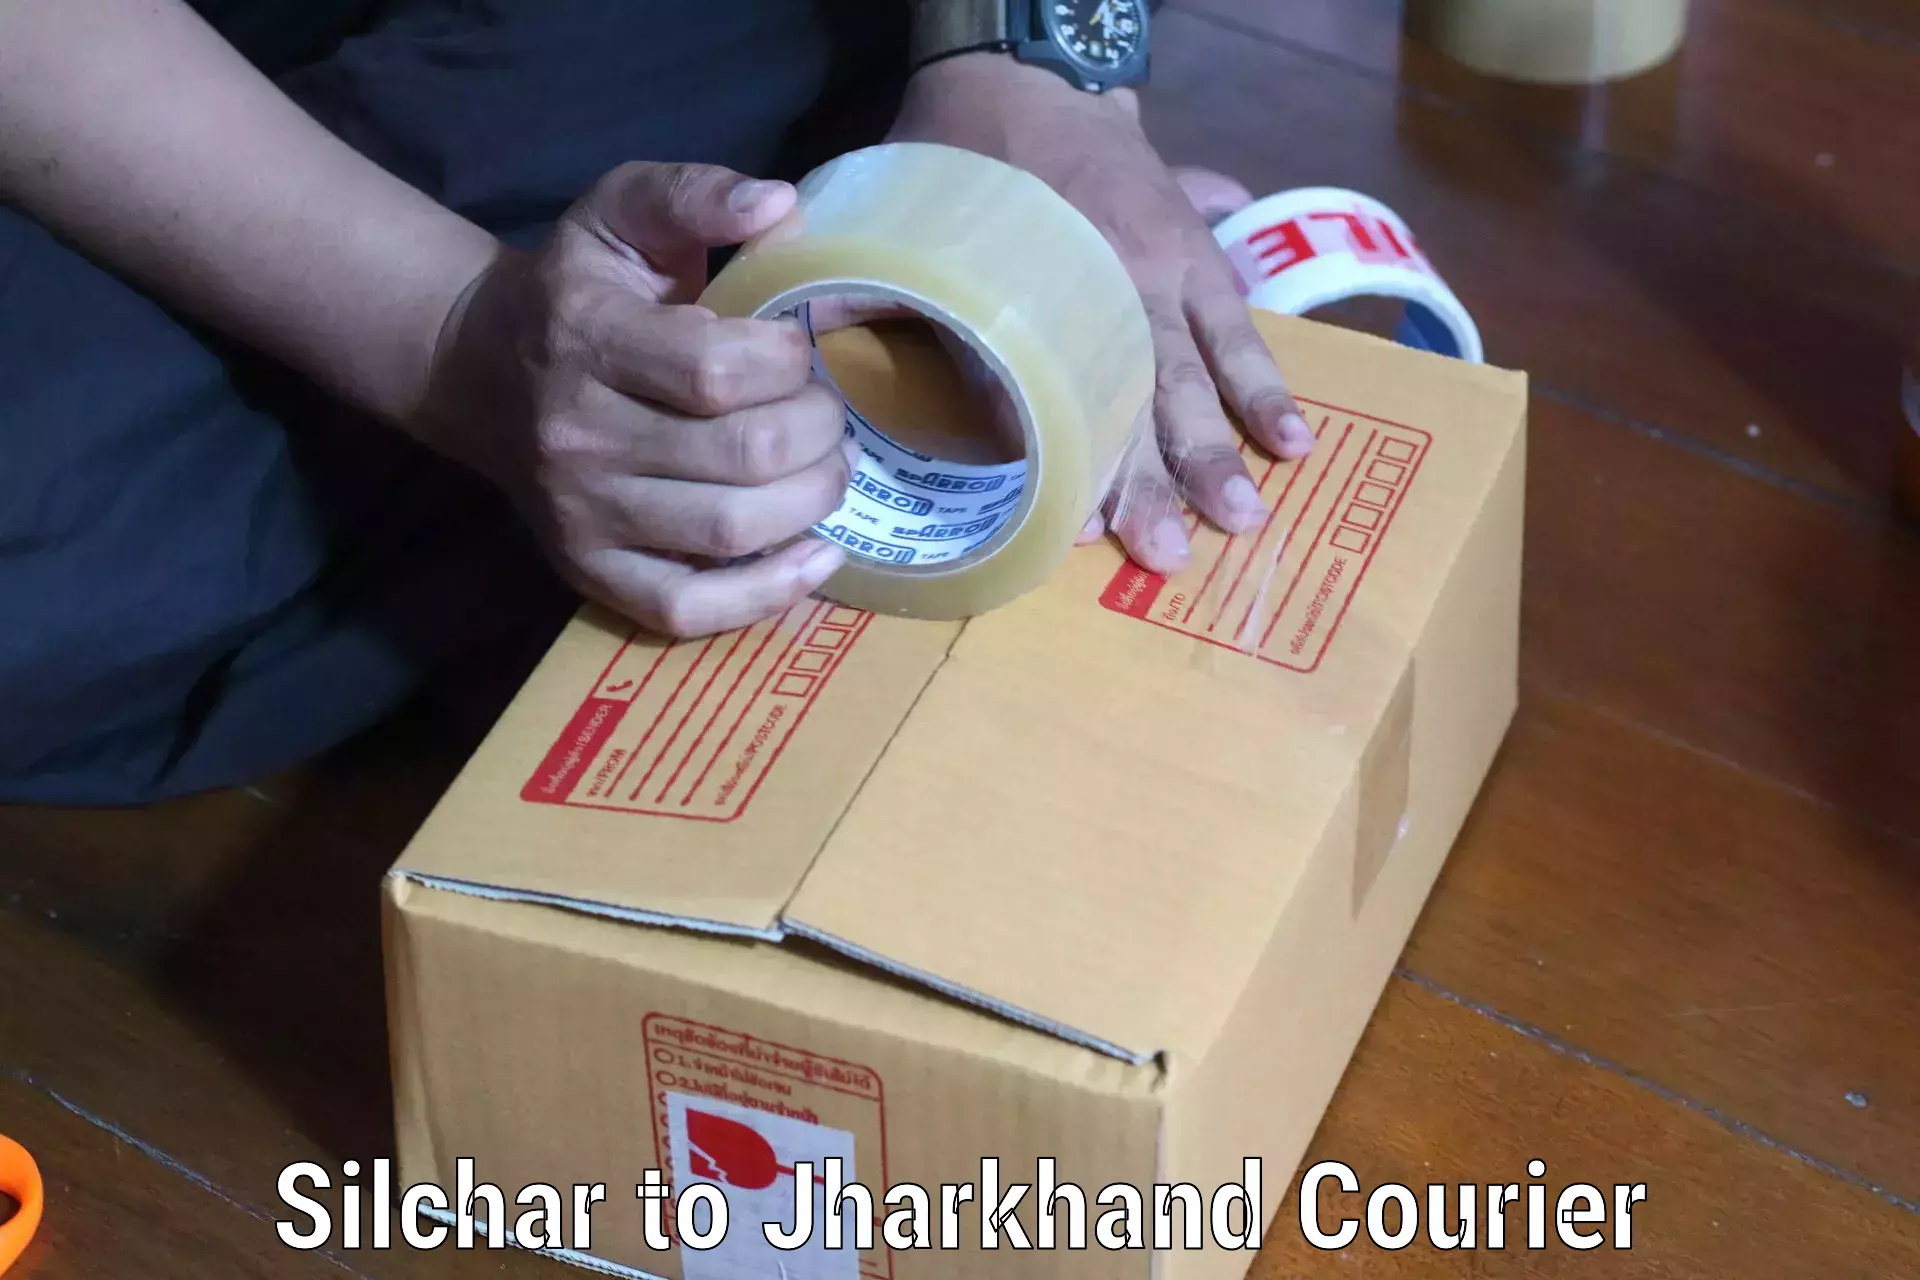 Professional courier handling Silchar to Latehar